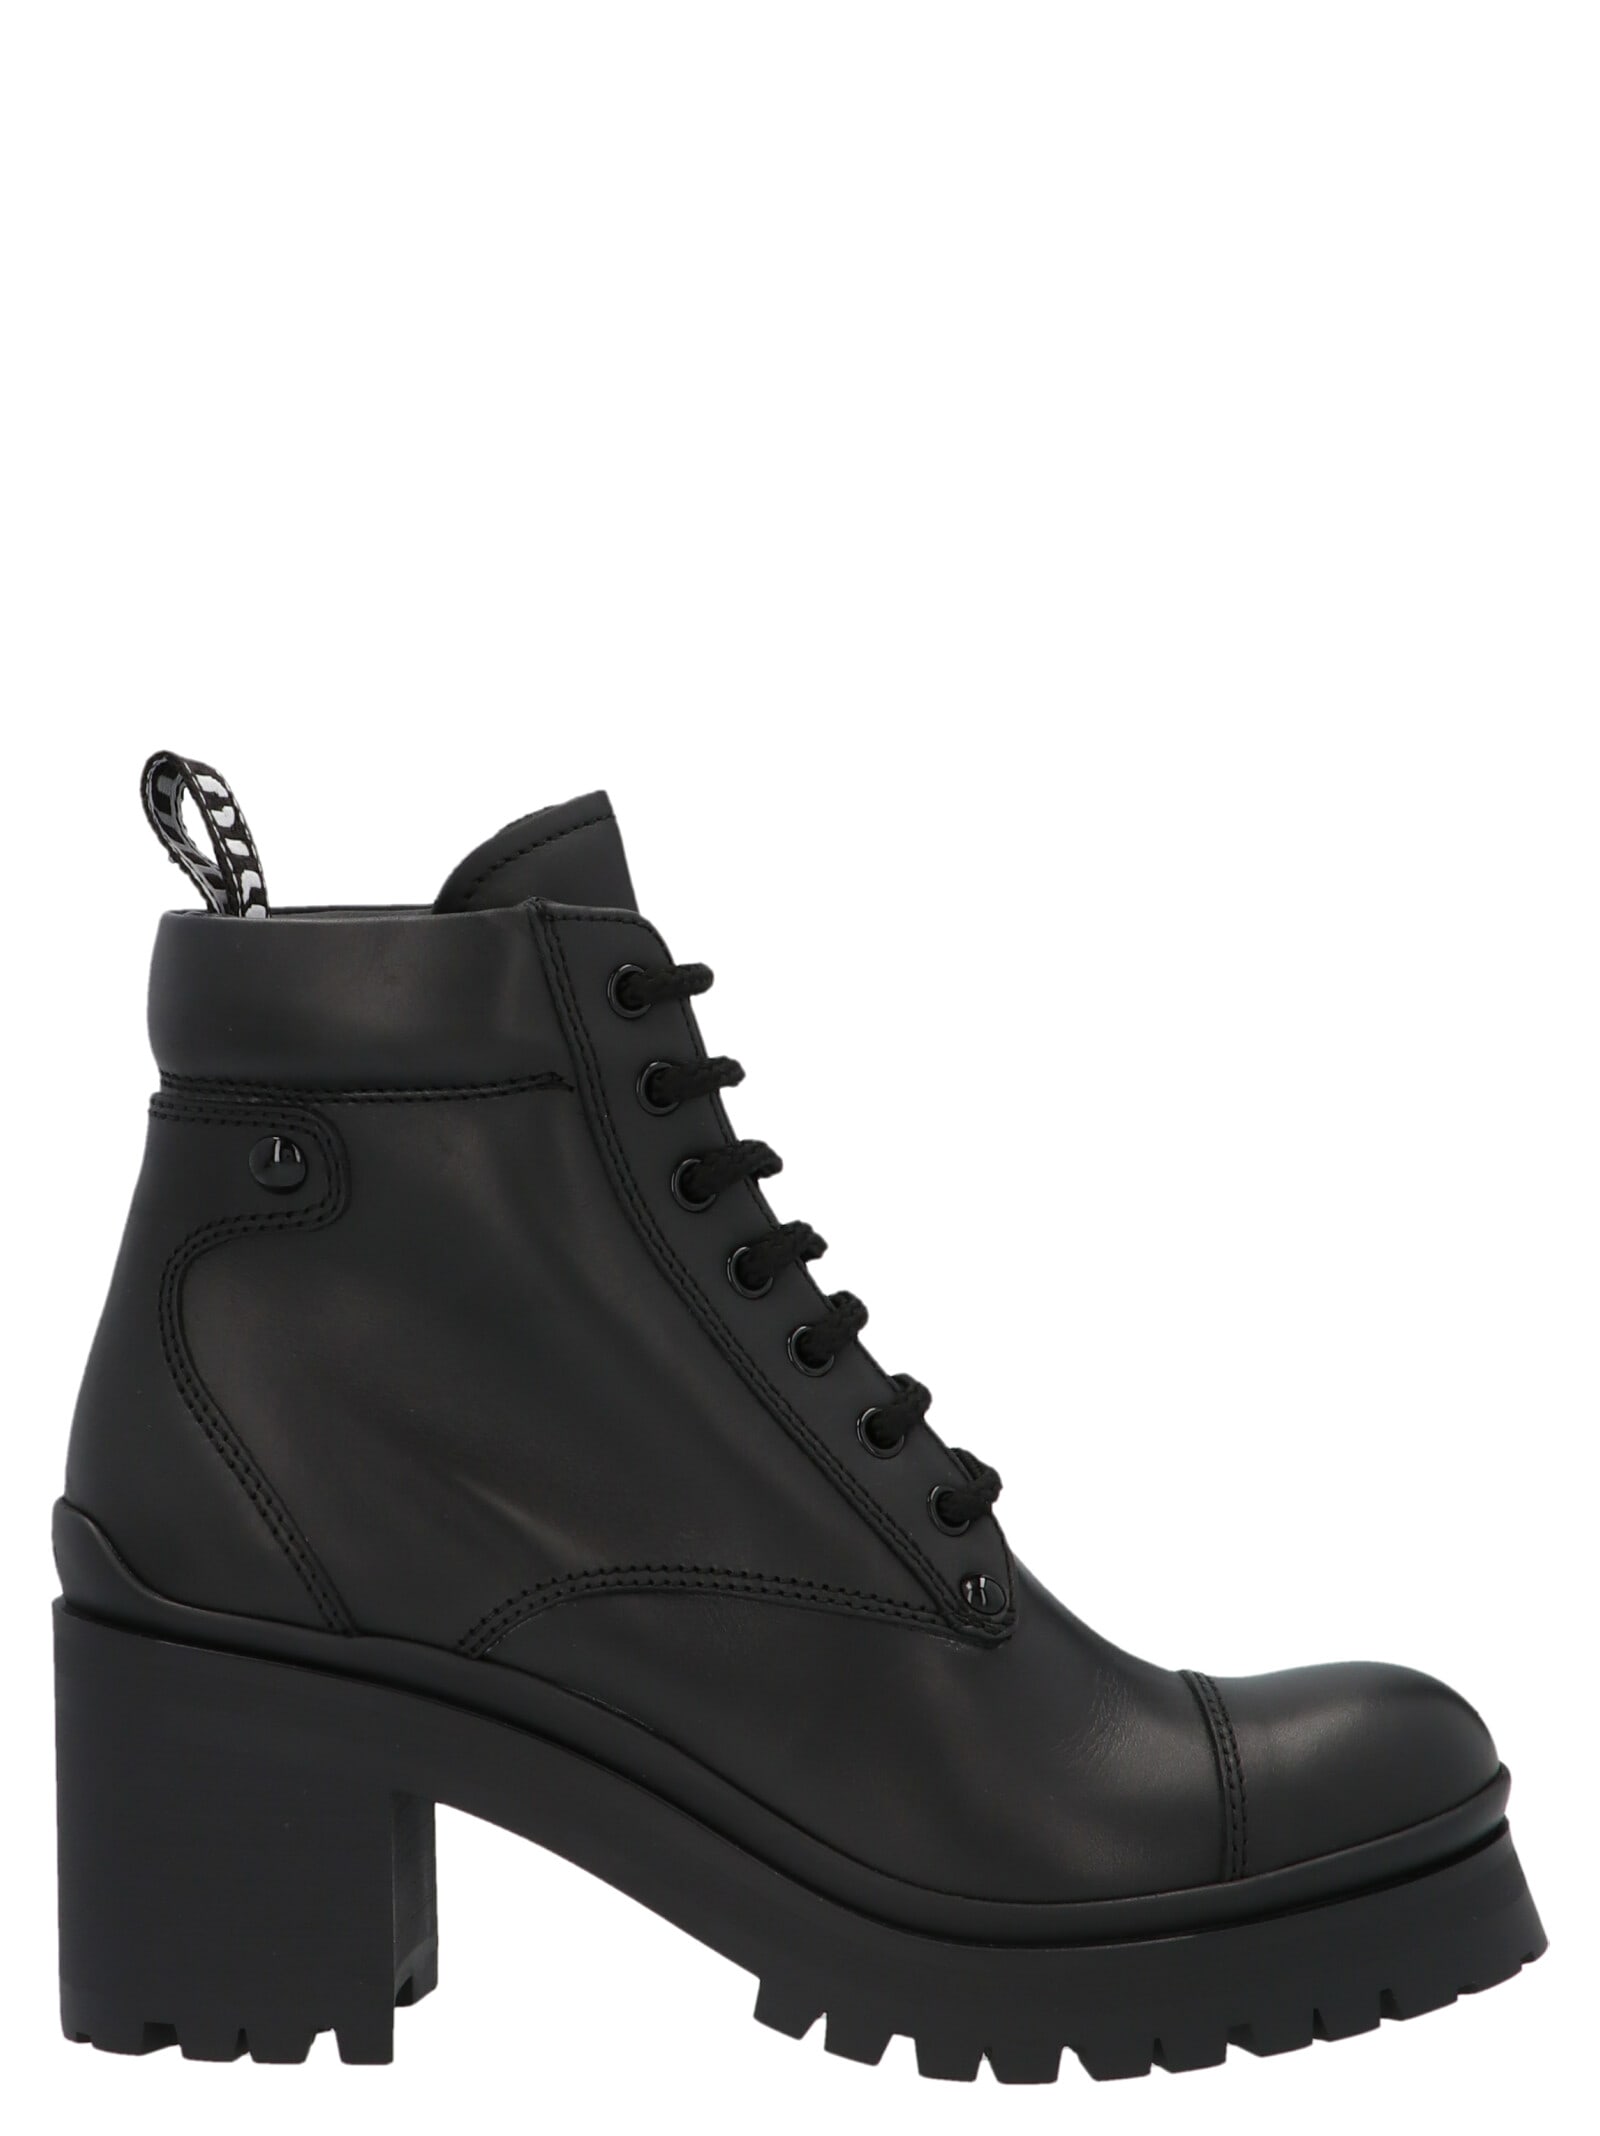 Buy Miu Miu Military-style Ankle Boots online, shop Miu Miu shoes with free shipping